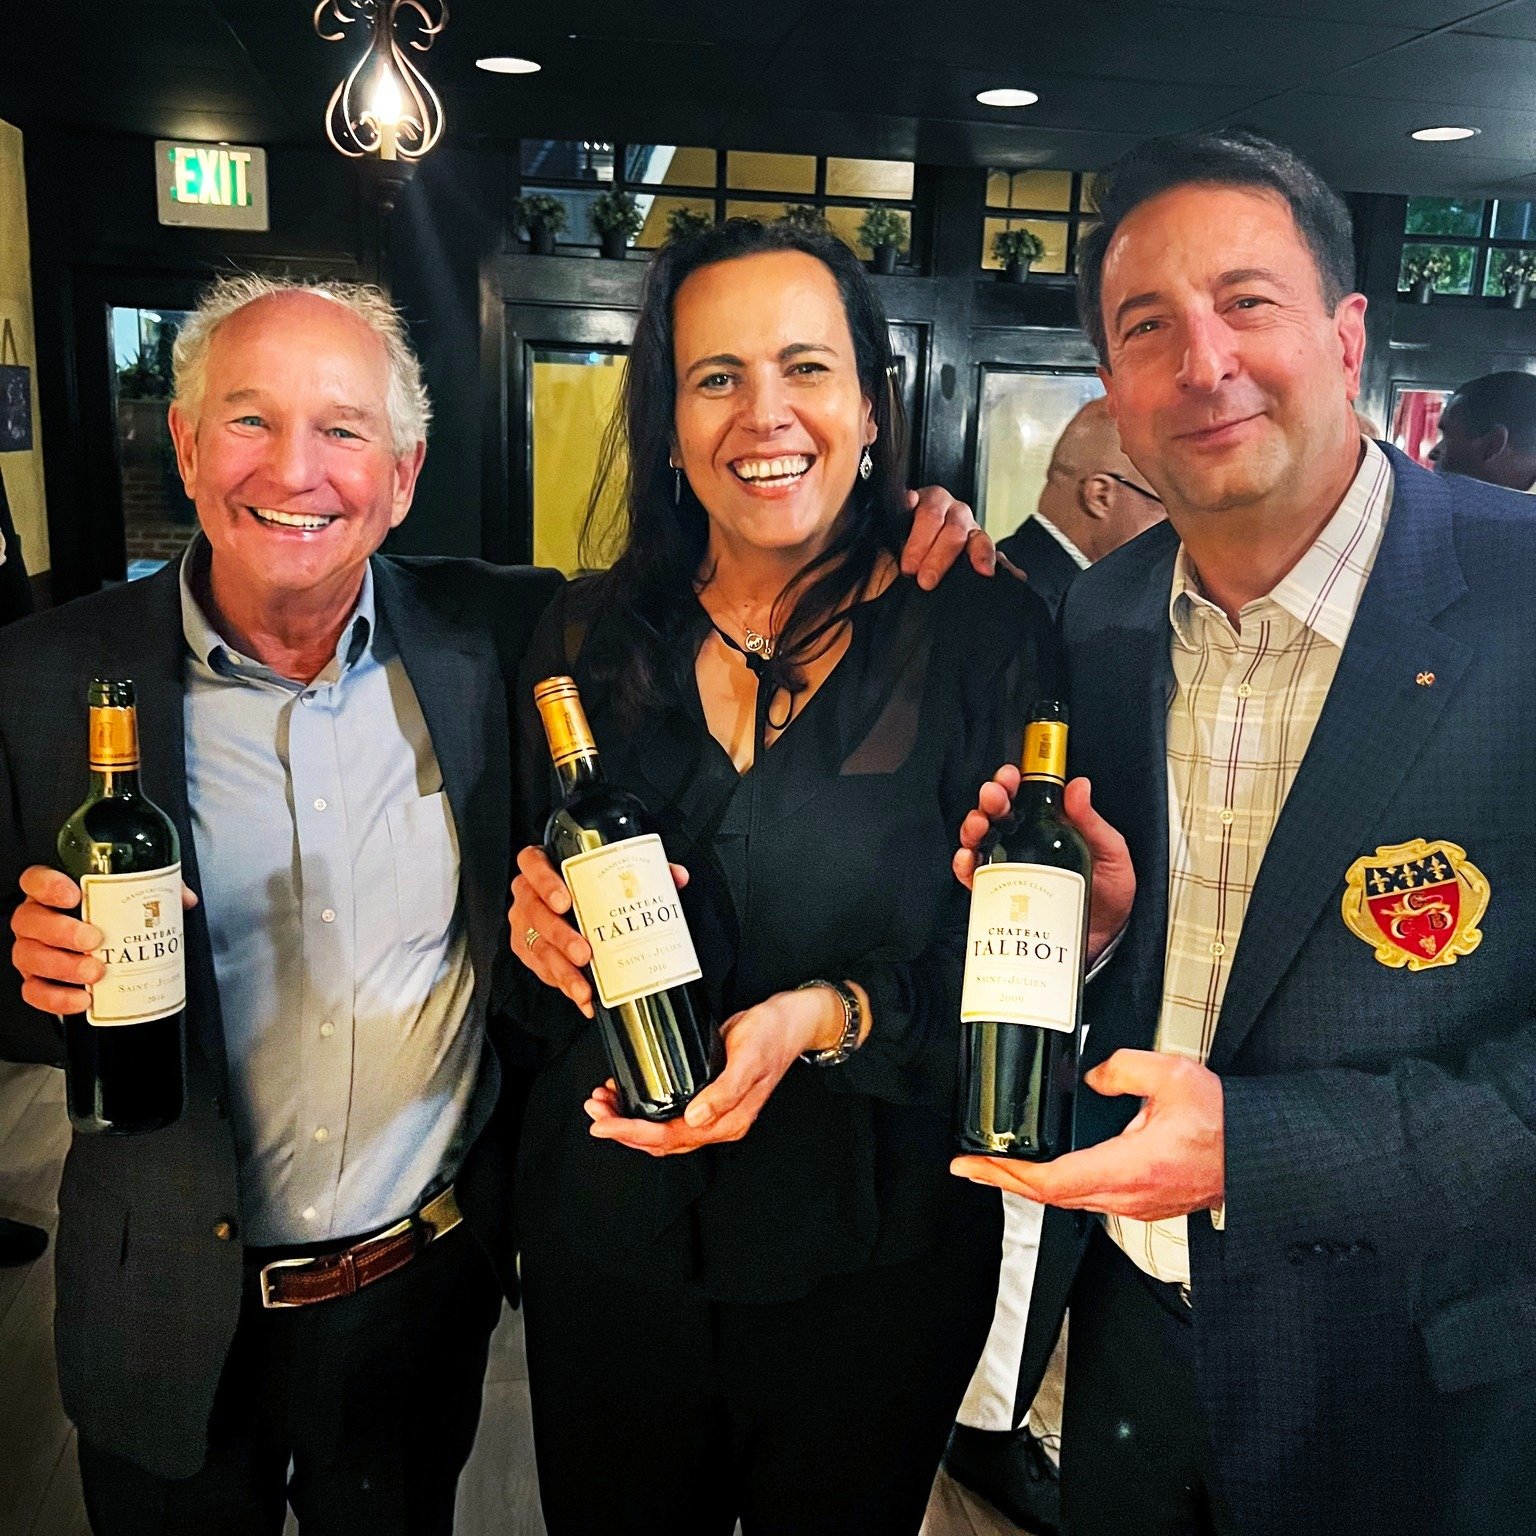 This has been a big week for Bordeaux wines with MISA Colorado!
Our MISA Colorado location organized  their first wine dinner in partnership with the Denver Chapter of the Commanderie de Bordeaux, featuring the wines of Ch&acirc;teau Talbot, 4th Gran